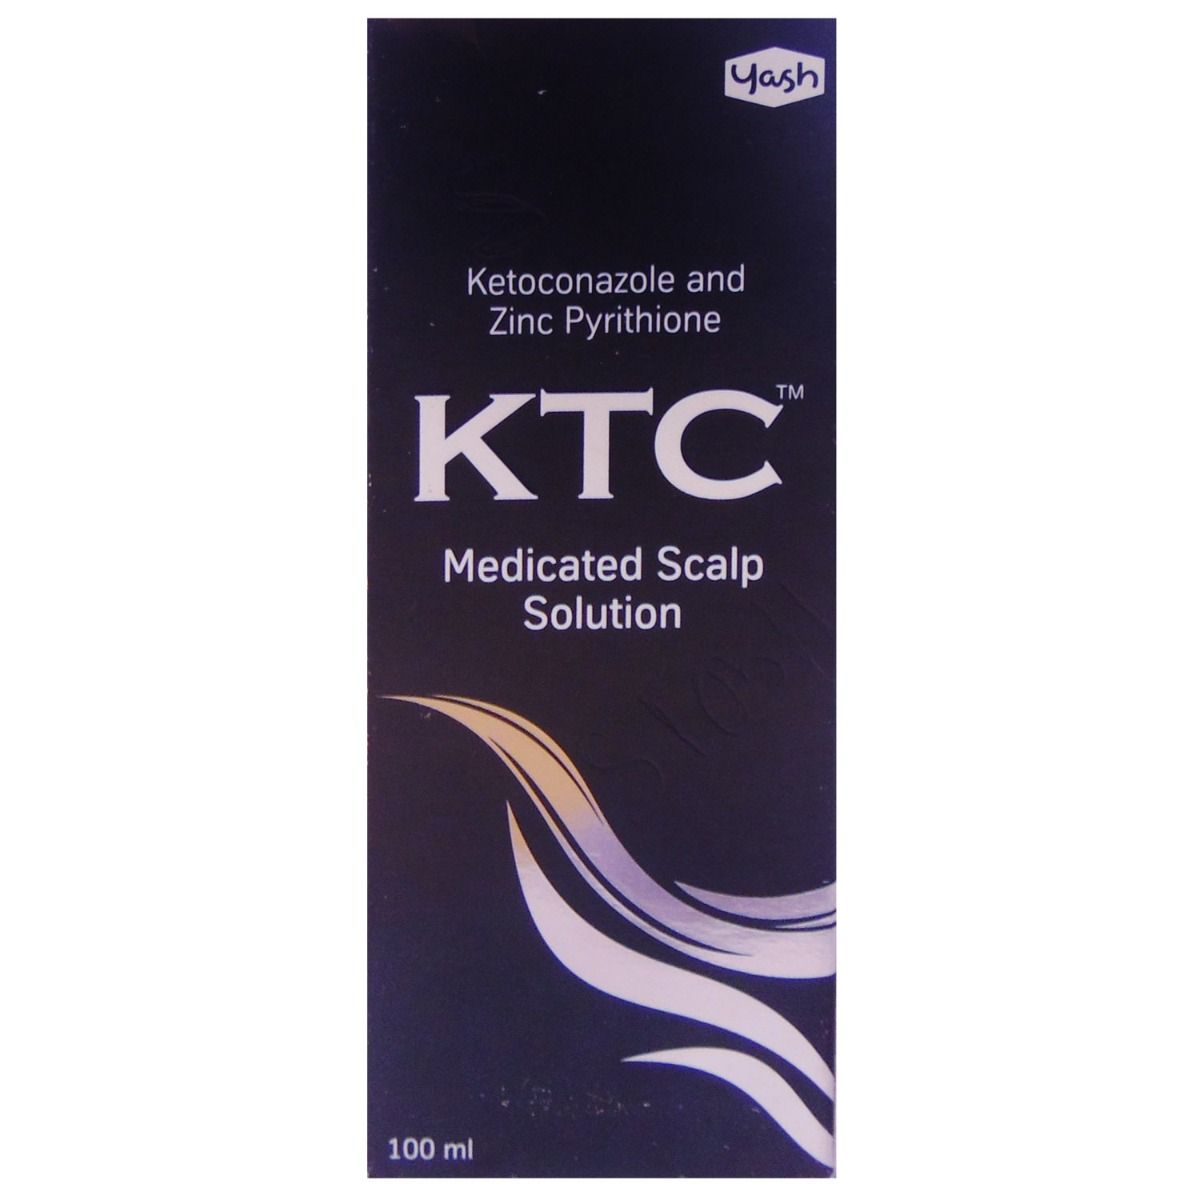 K T C Medicated Scalp Solution, 100 ml, Pack of 1 